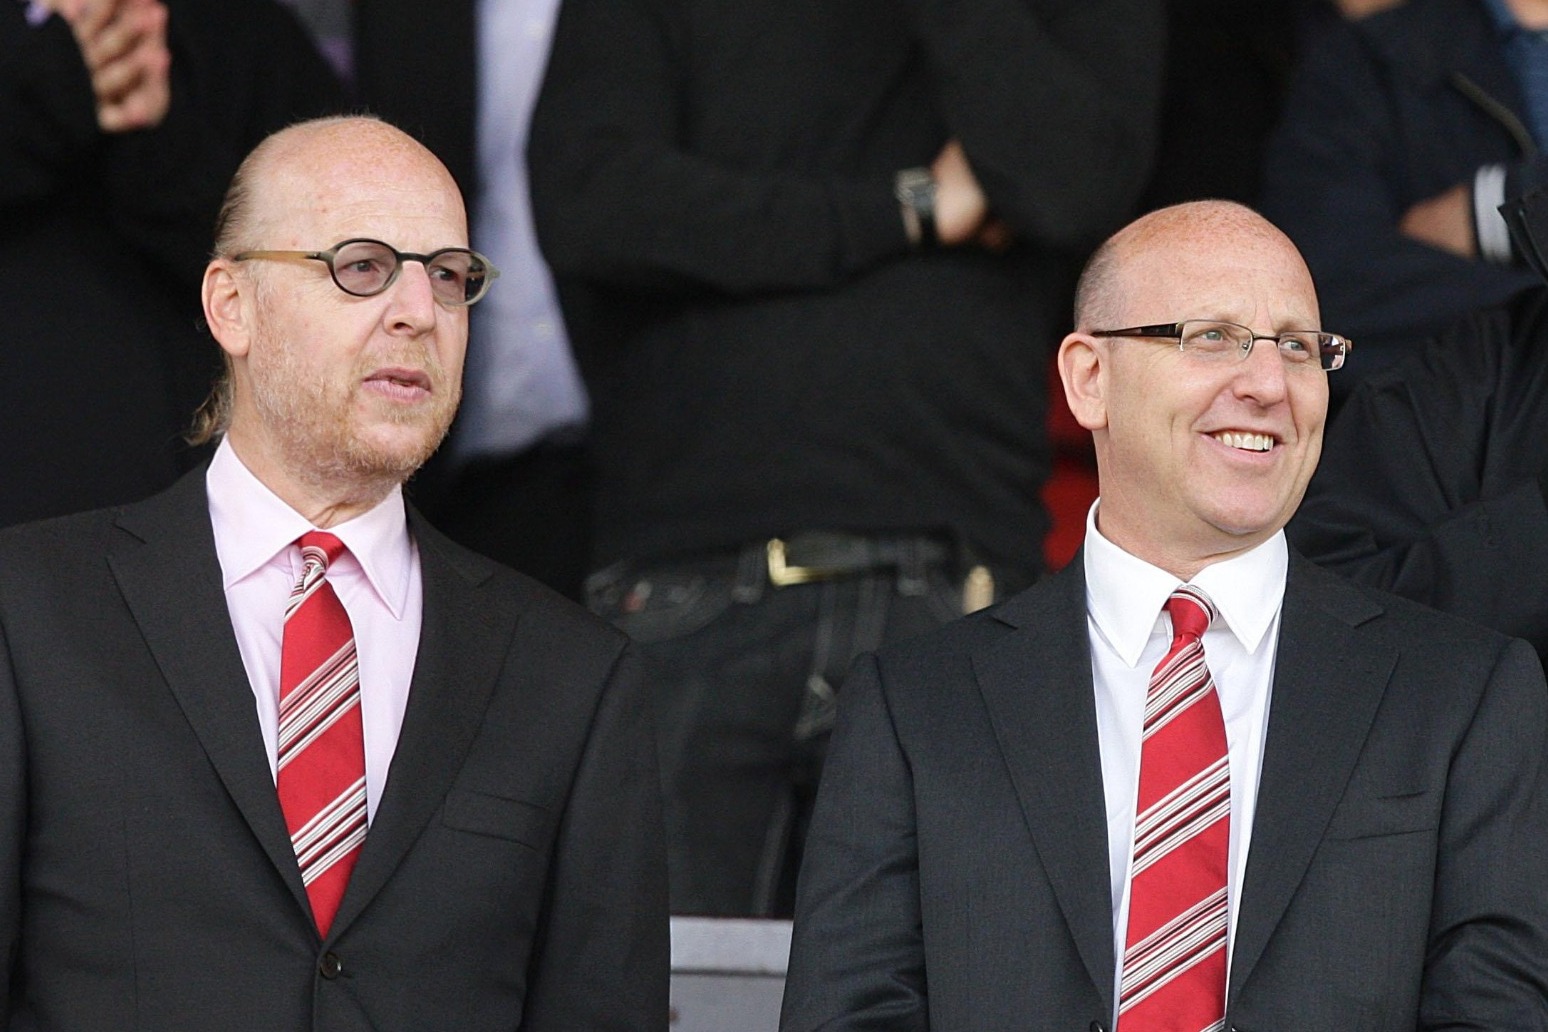 Manchester United co-chairman Joel Glazer vows to improve communication with fans 